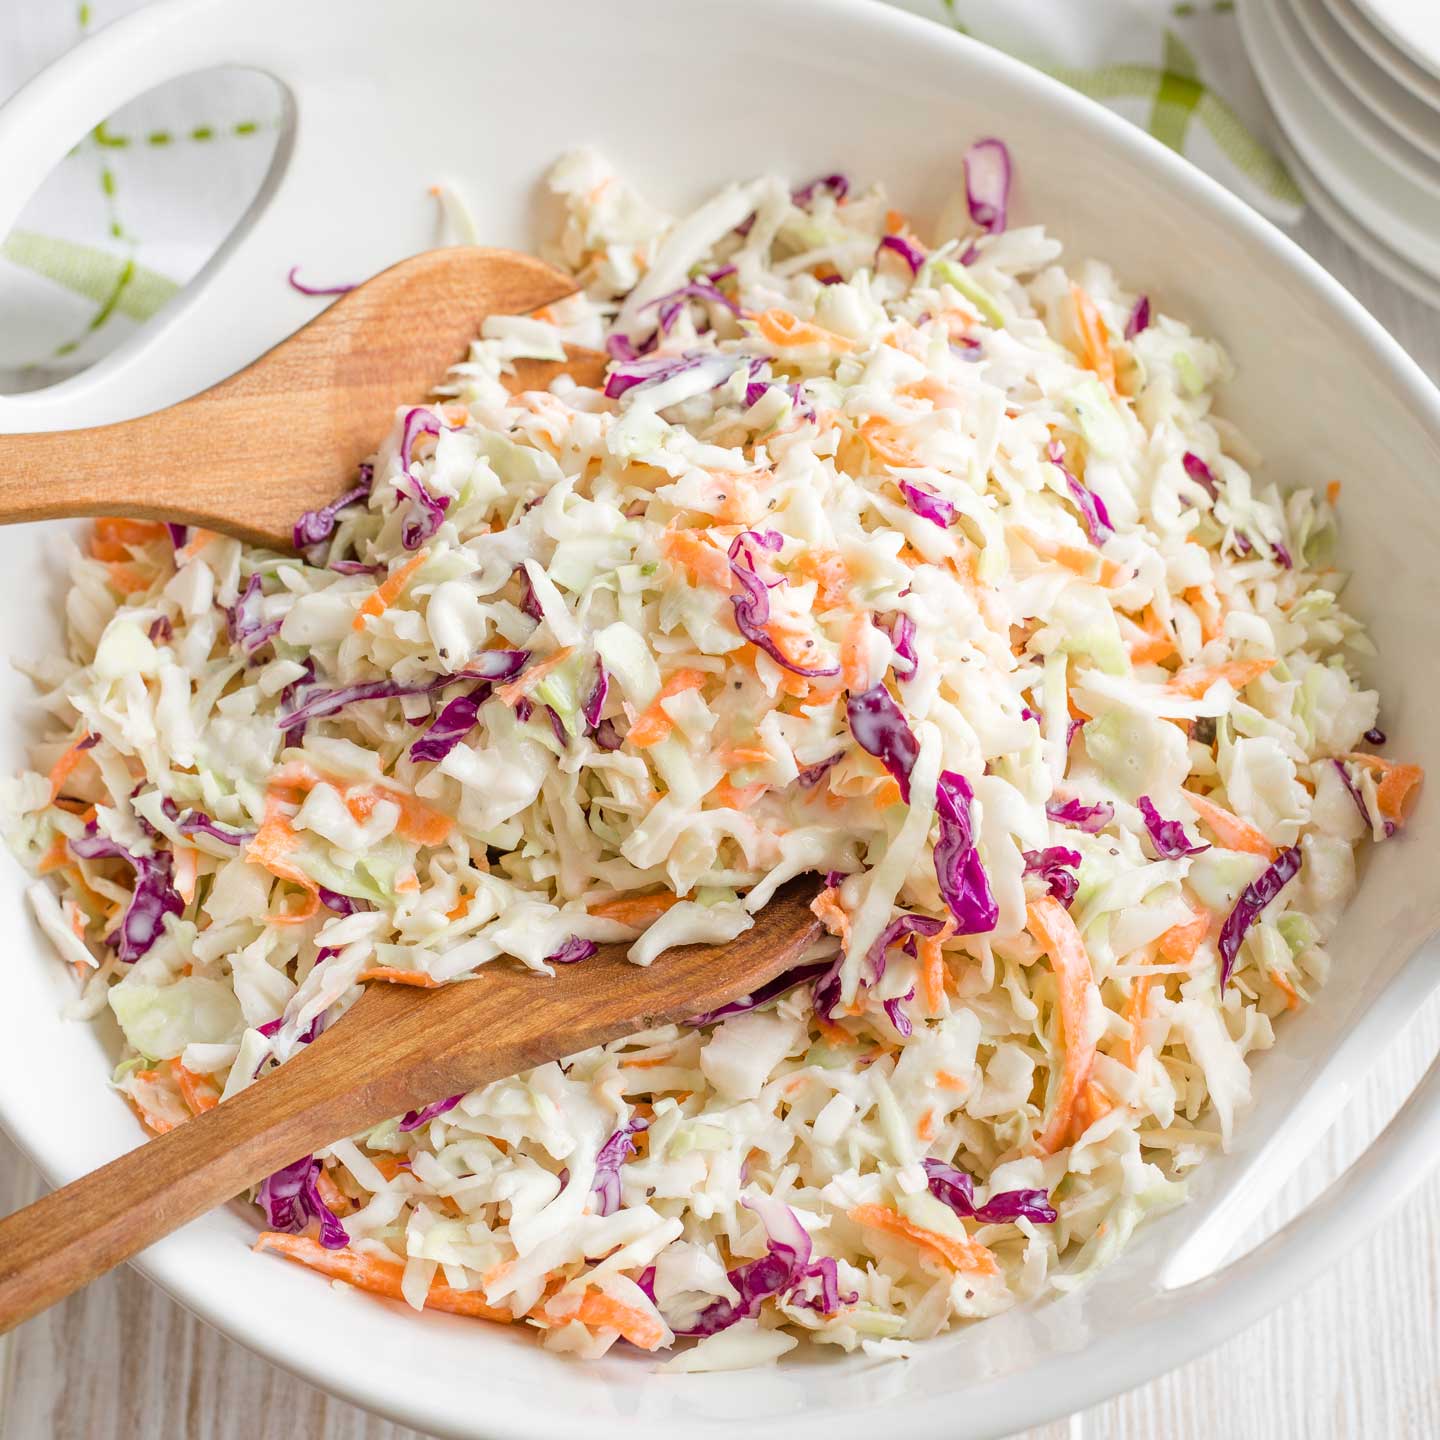 Overhead photo of a white serving bowl full of coleslaw, with a wooden serving set scooping into it